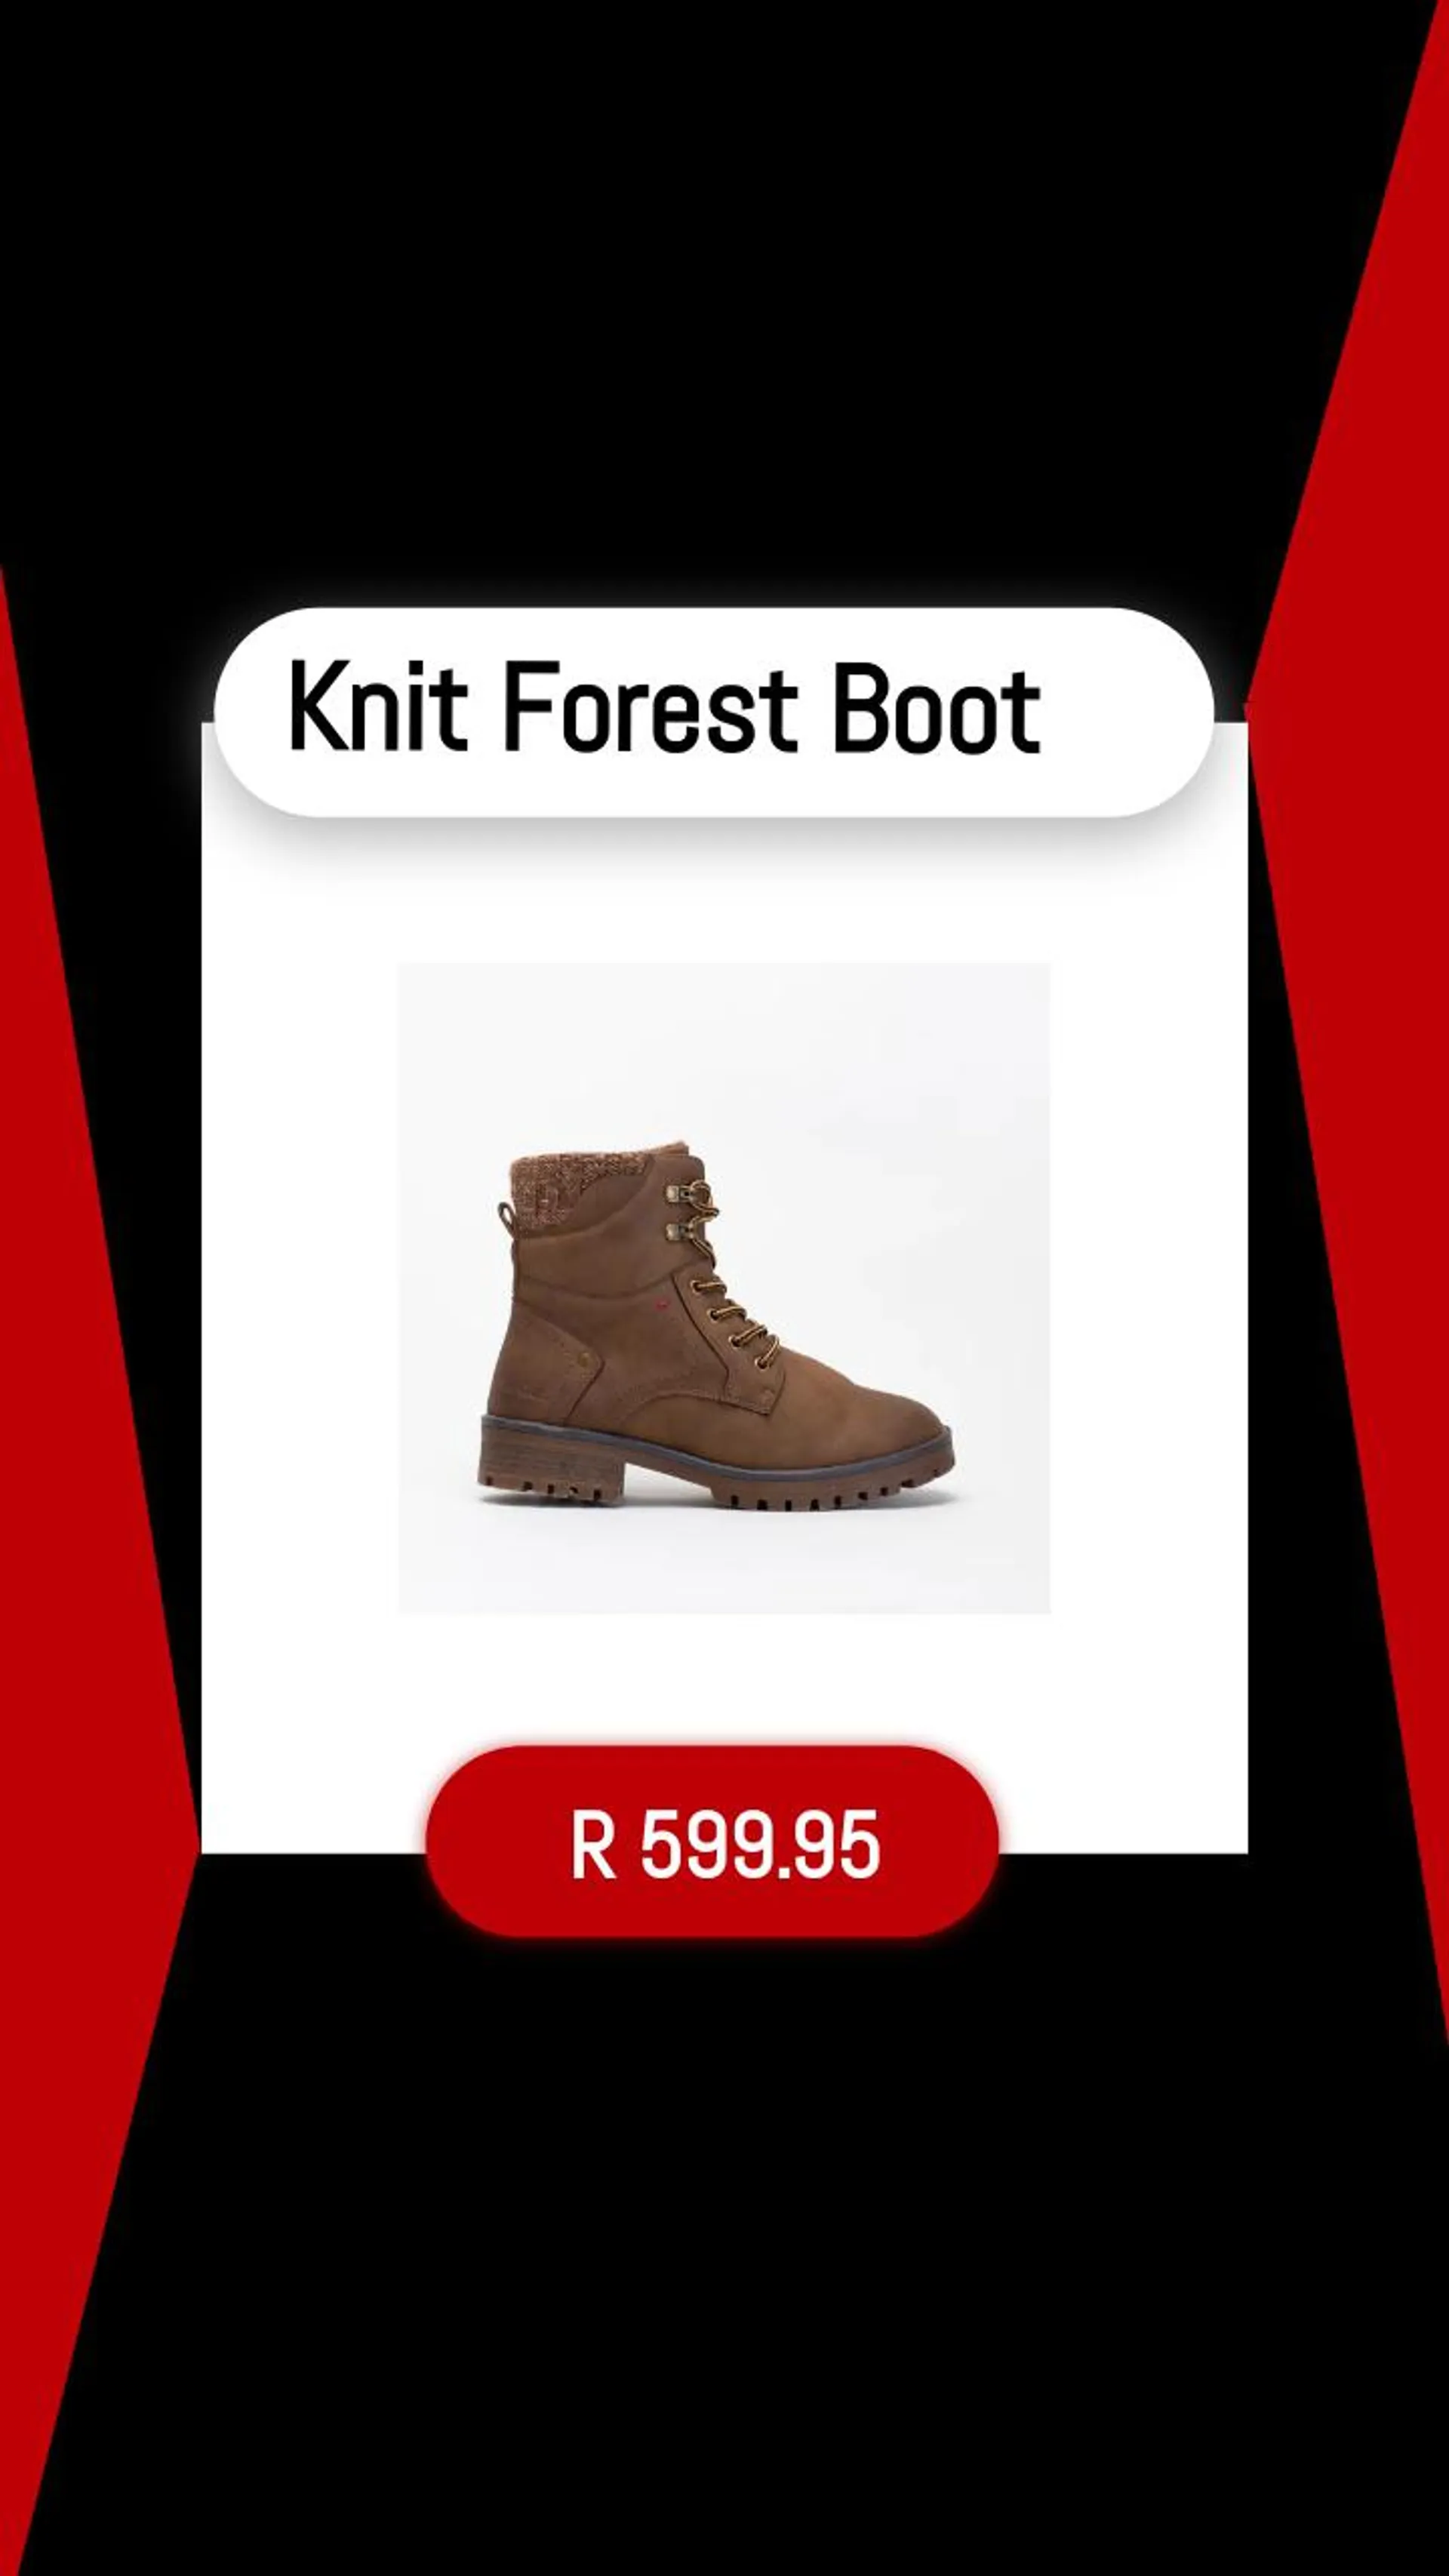 Knit Forest Boot